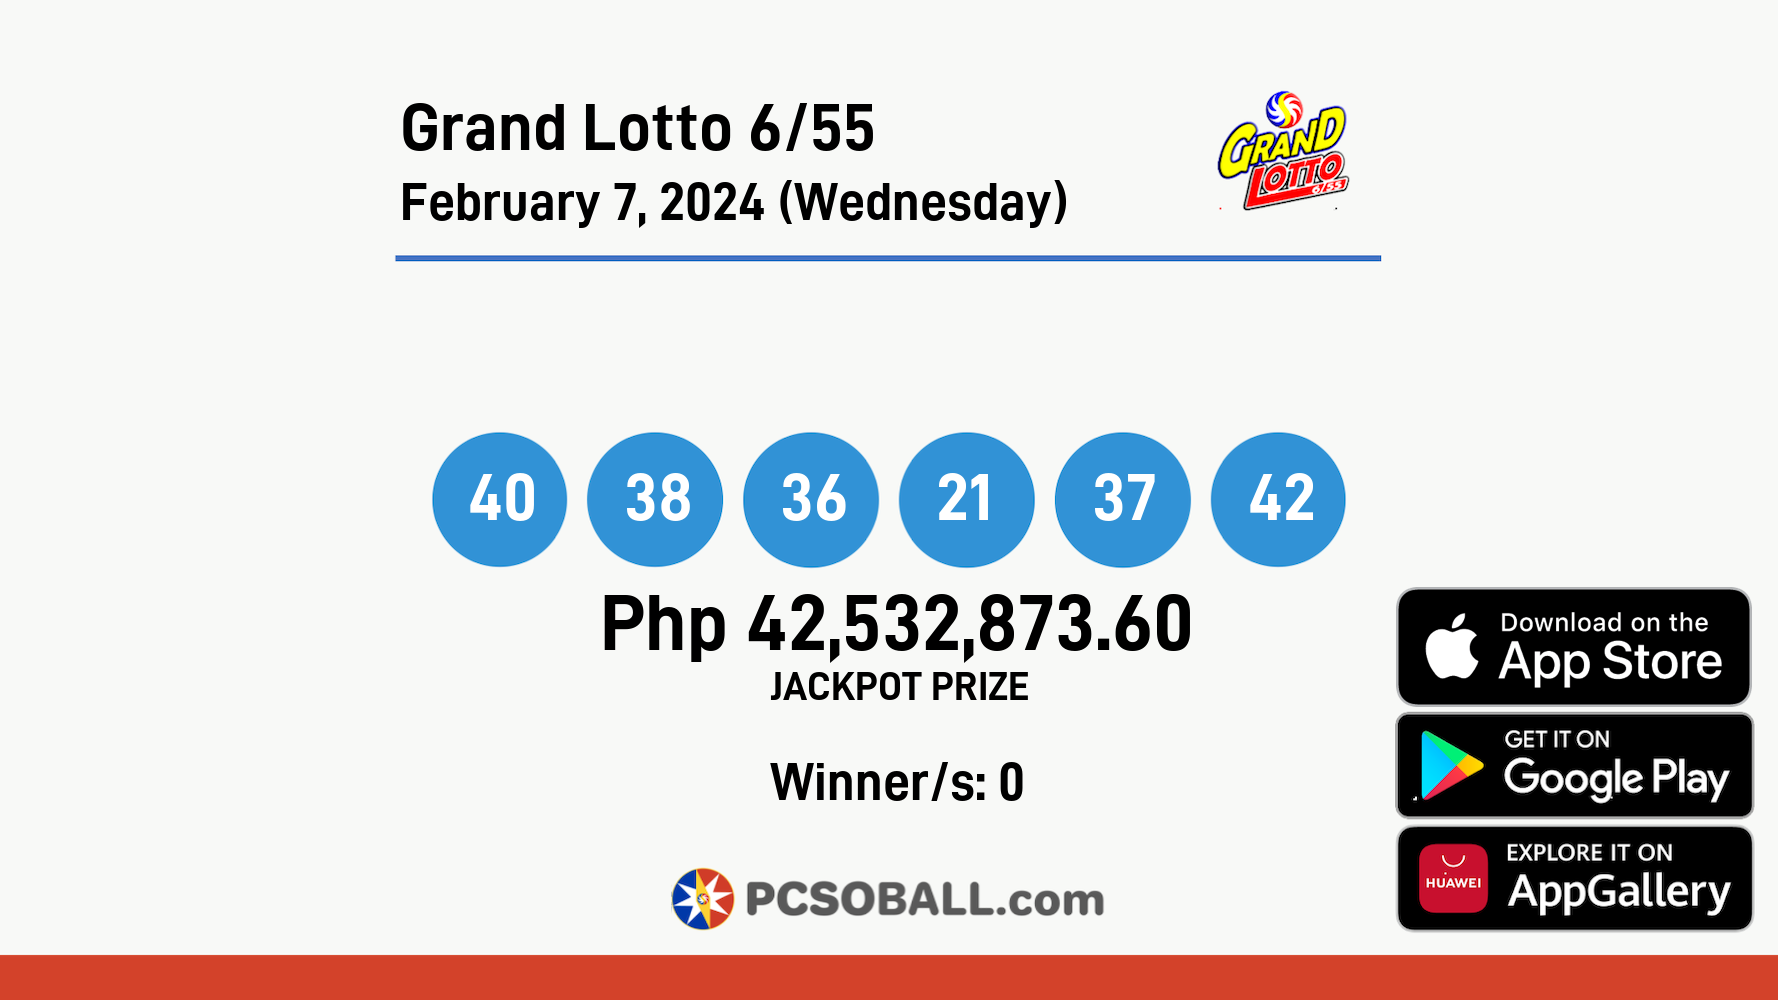 Grand Lotto 6/55 February 7, 2024 (Wednesday) Result